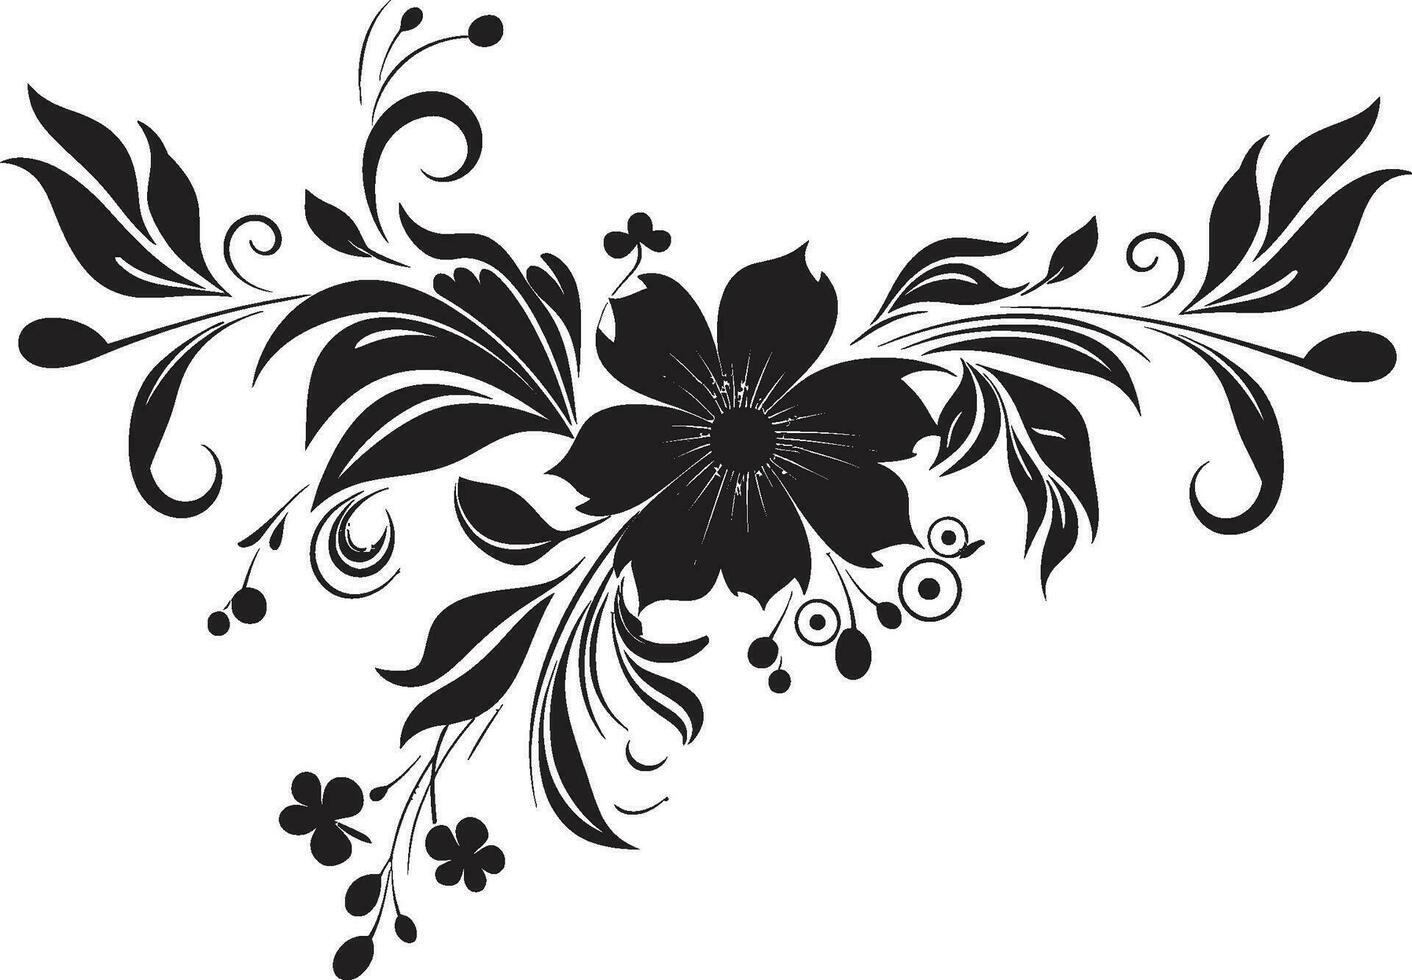 Intricate Noir Blossoms Hand Rendered Vector Icon Whimsical Botanical Sketch Black Iconic Design